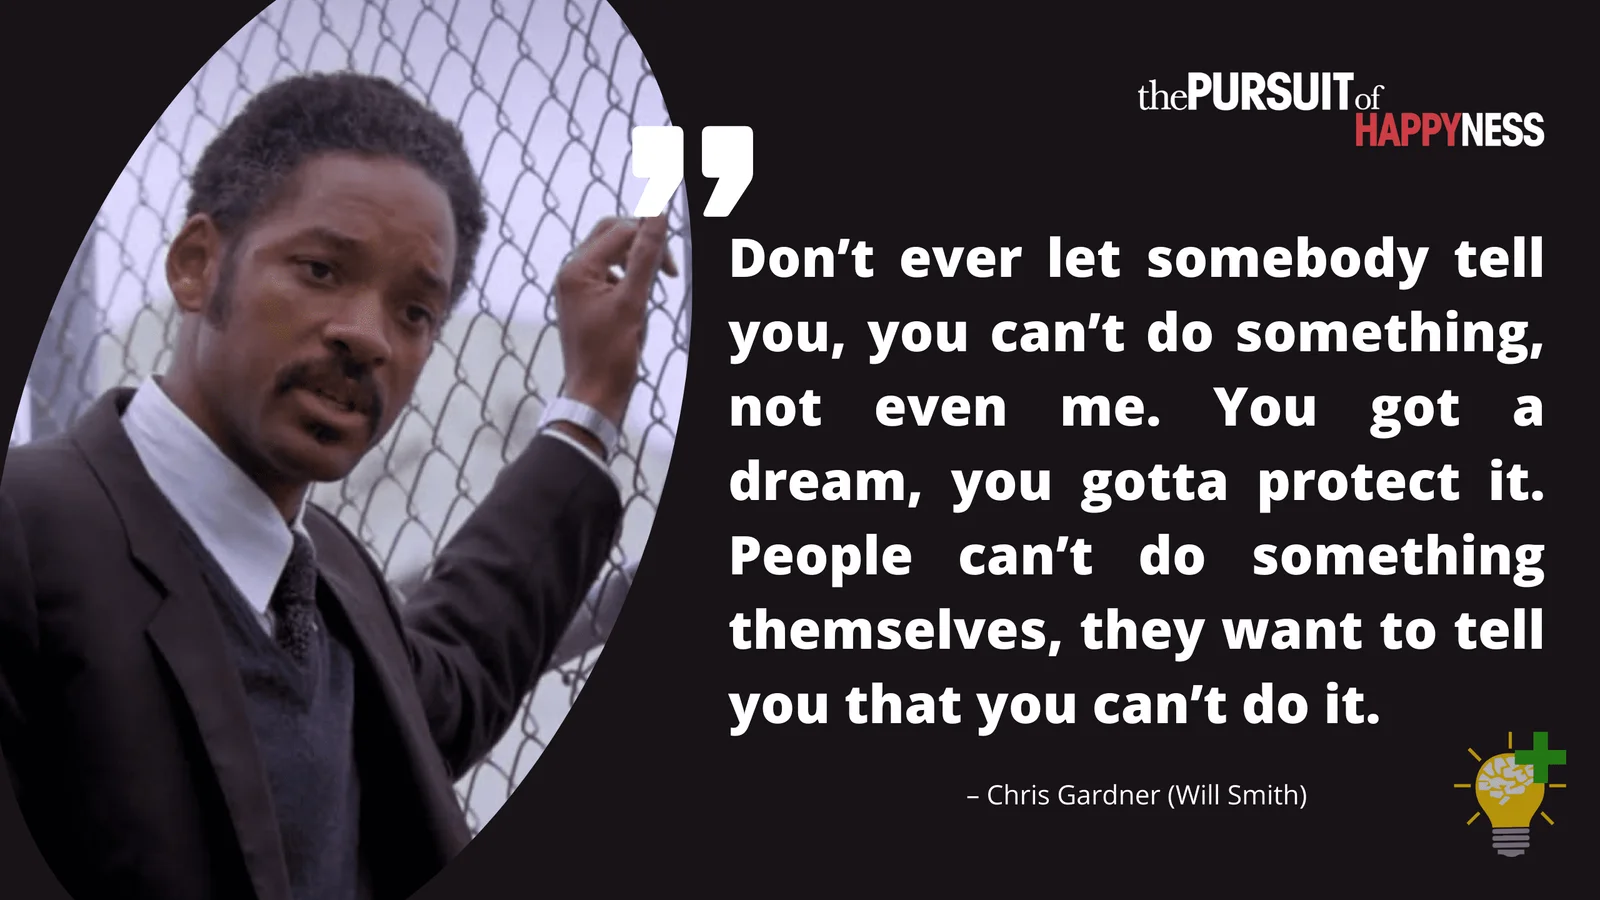 pursuit of happiness quotes will smith